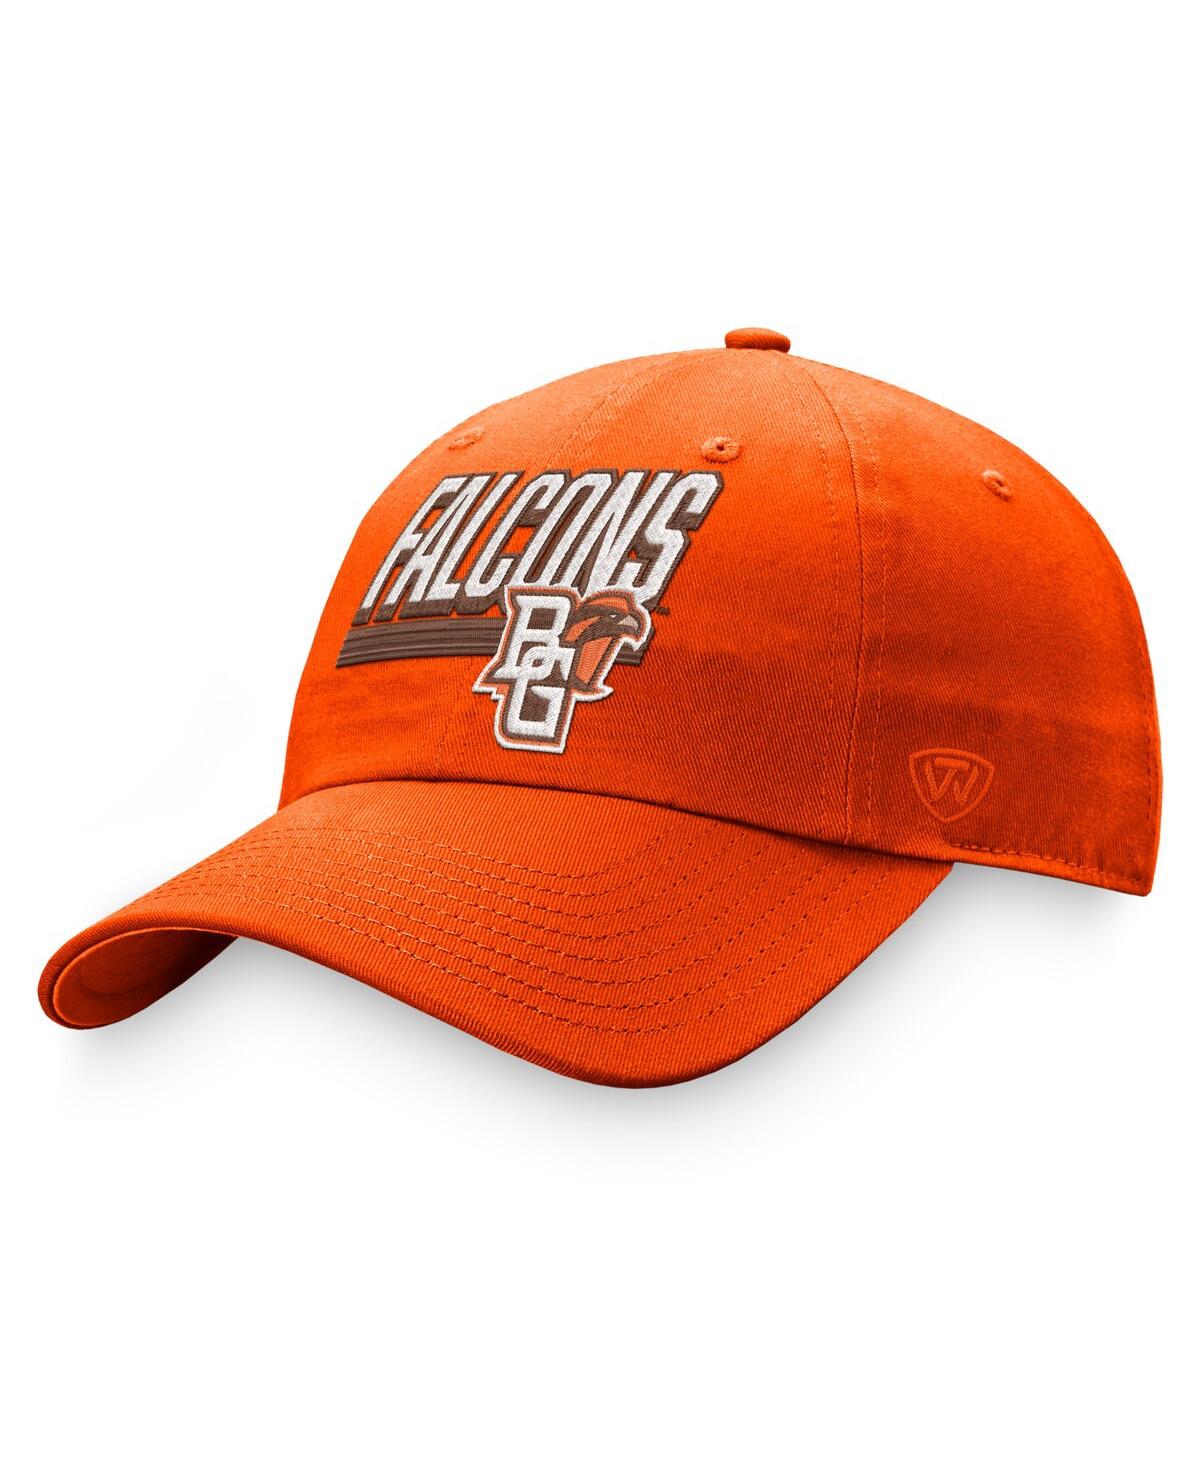 TOP OF THE WORLD MEN'S TOP OF THE WORLD ORANGE BOWLING GREEN ST. FALCONS SLICE ADJUSTABLE HAT